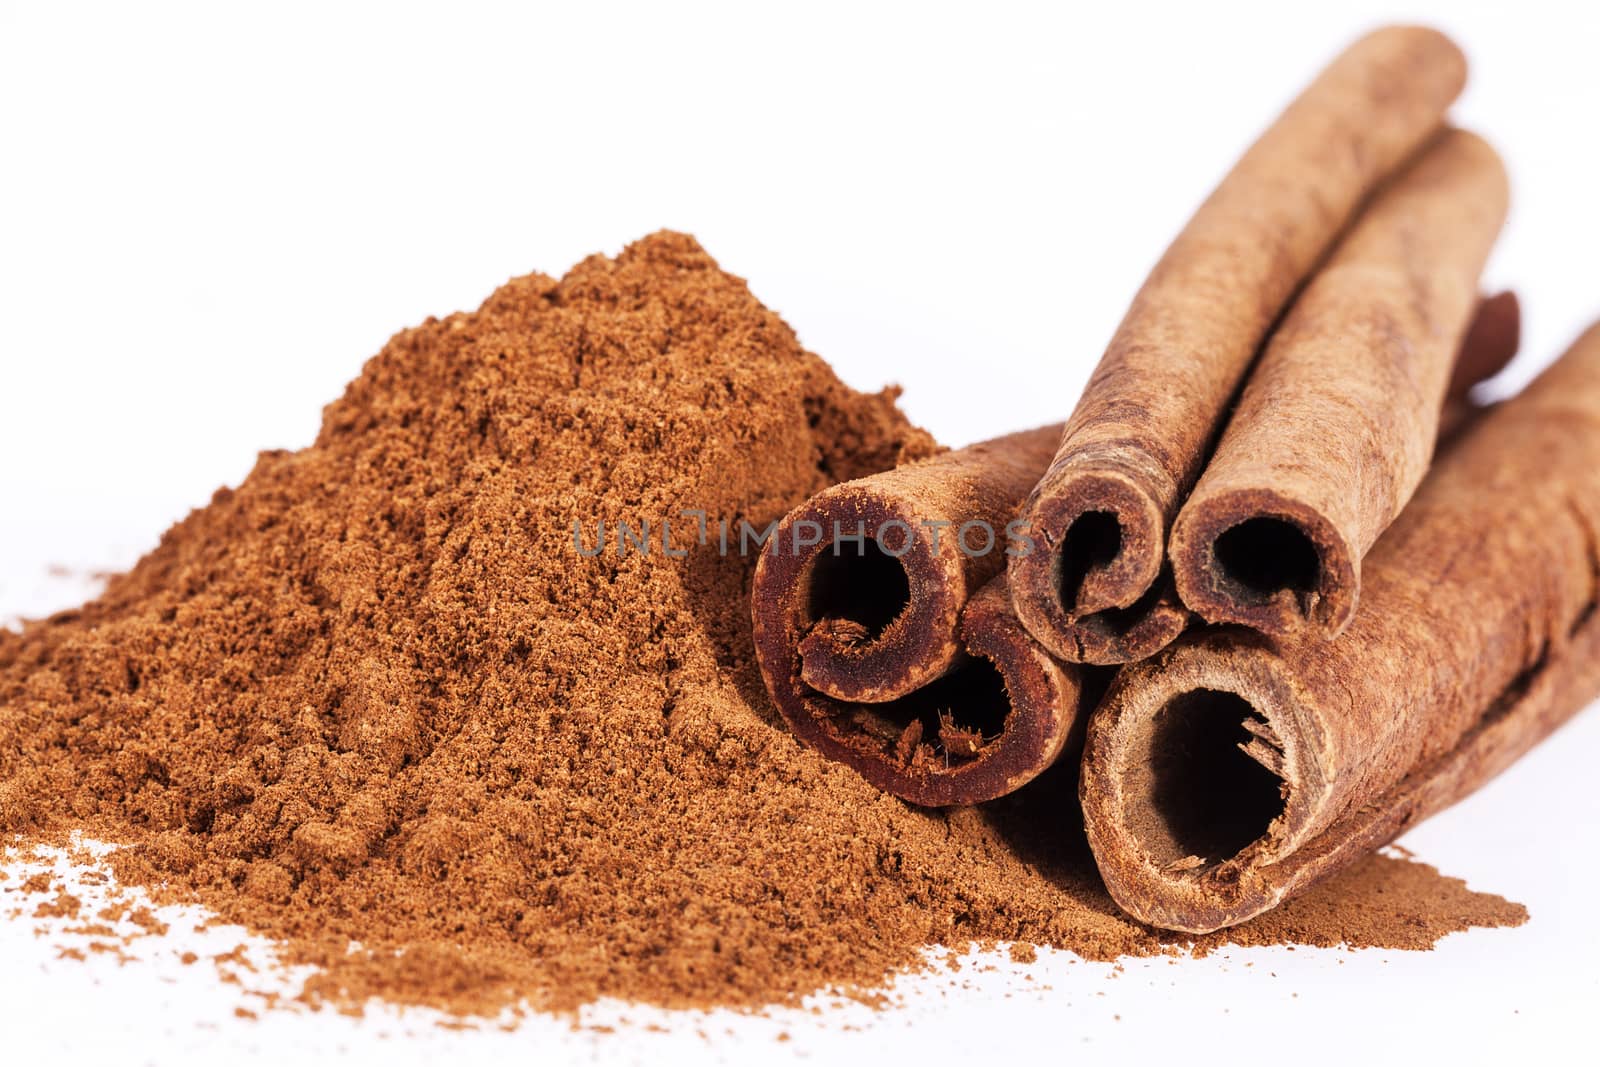 Cinnamon sticks and powder isolated on white background by mychadre77